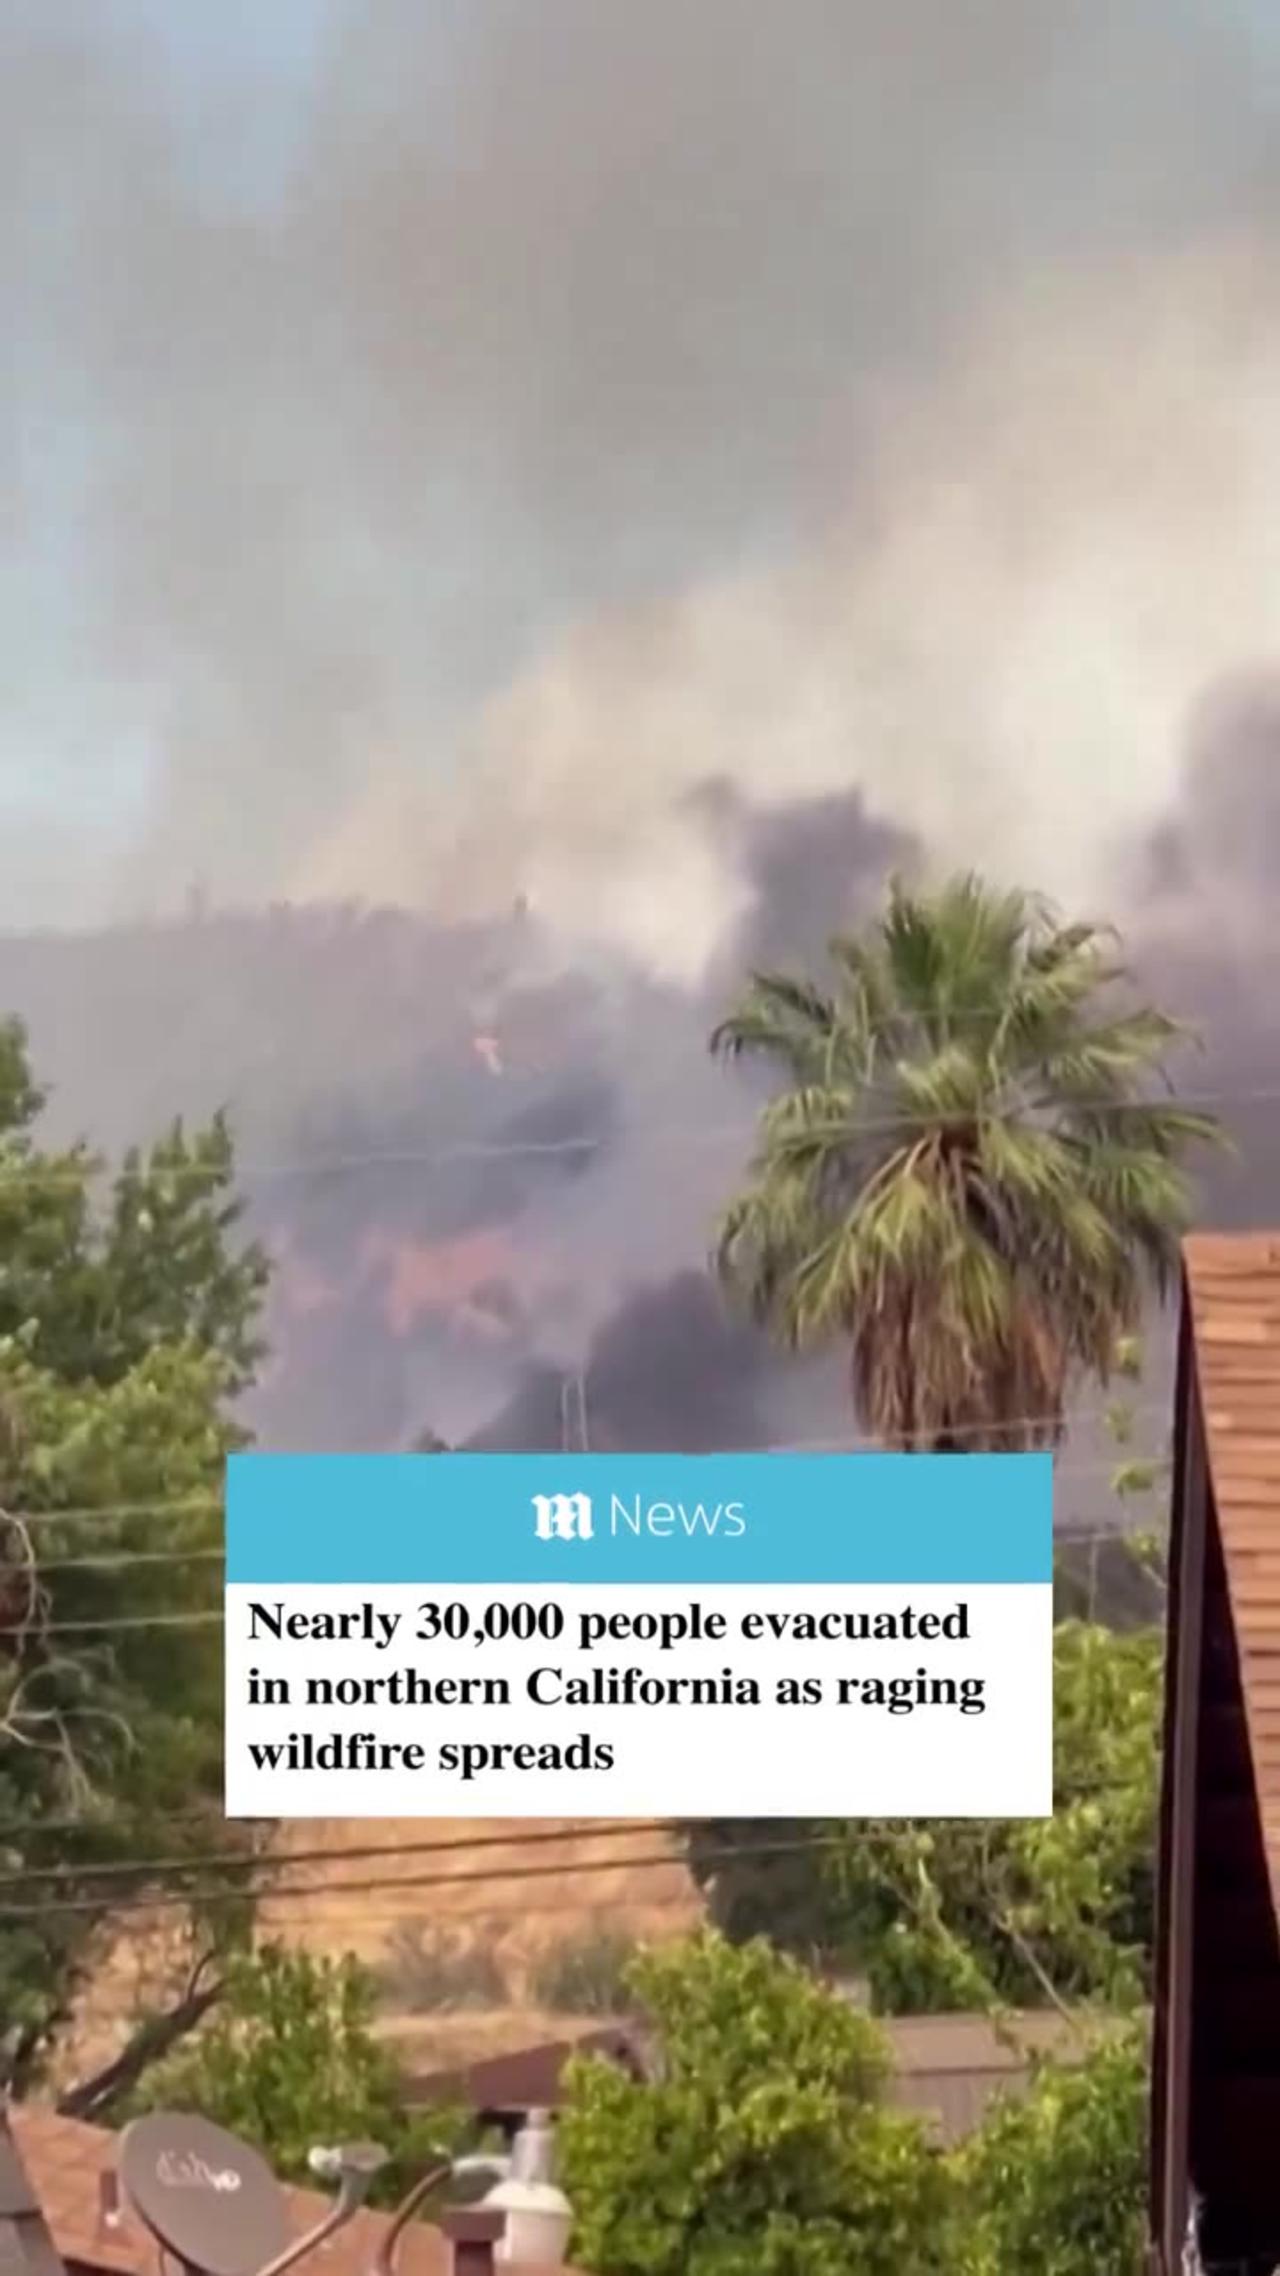 BREAKING: Nearly 30,000 people evacuated in northern California as raging wildfire spreads.